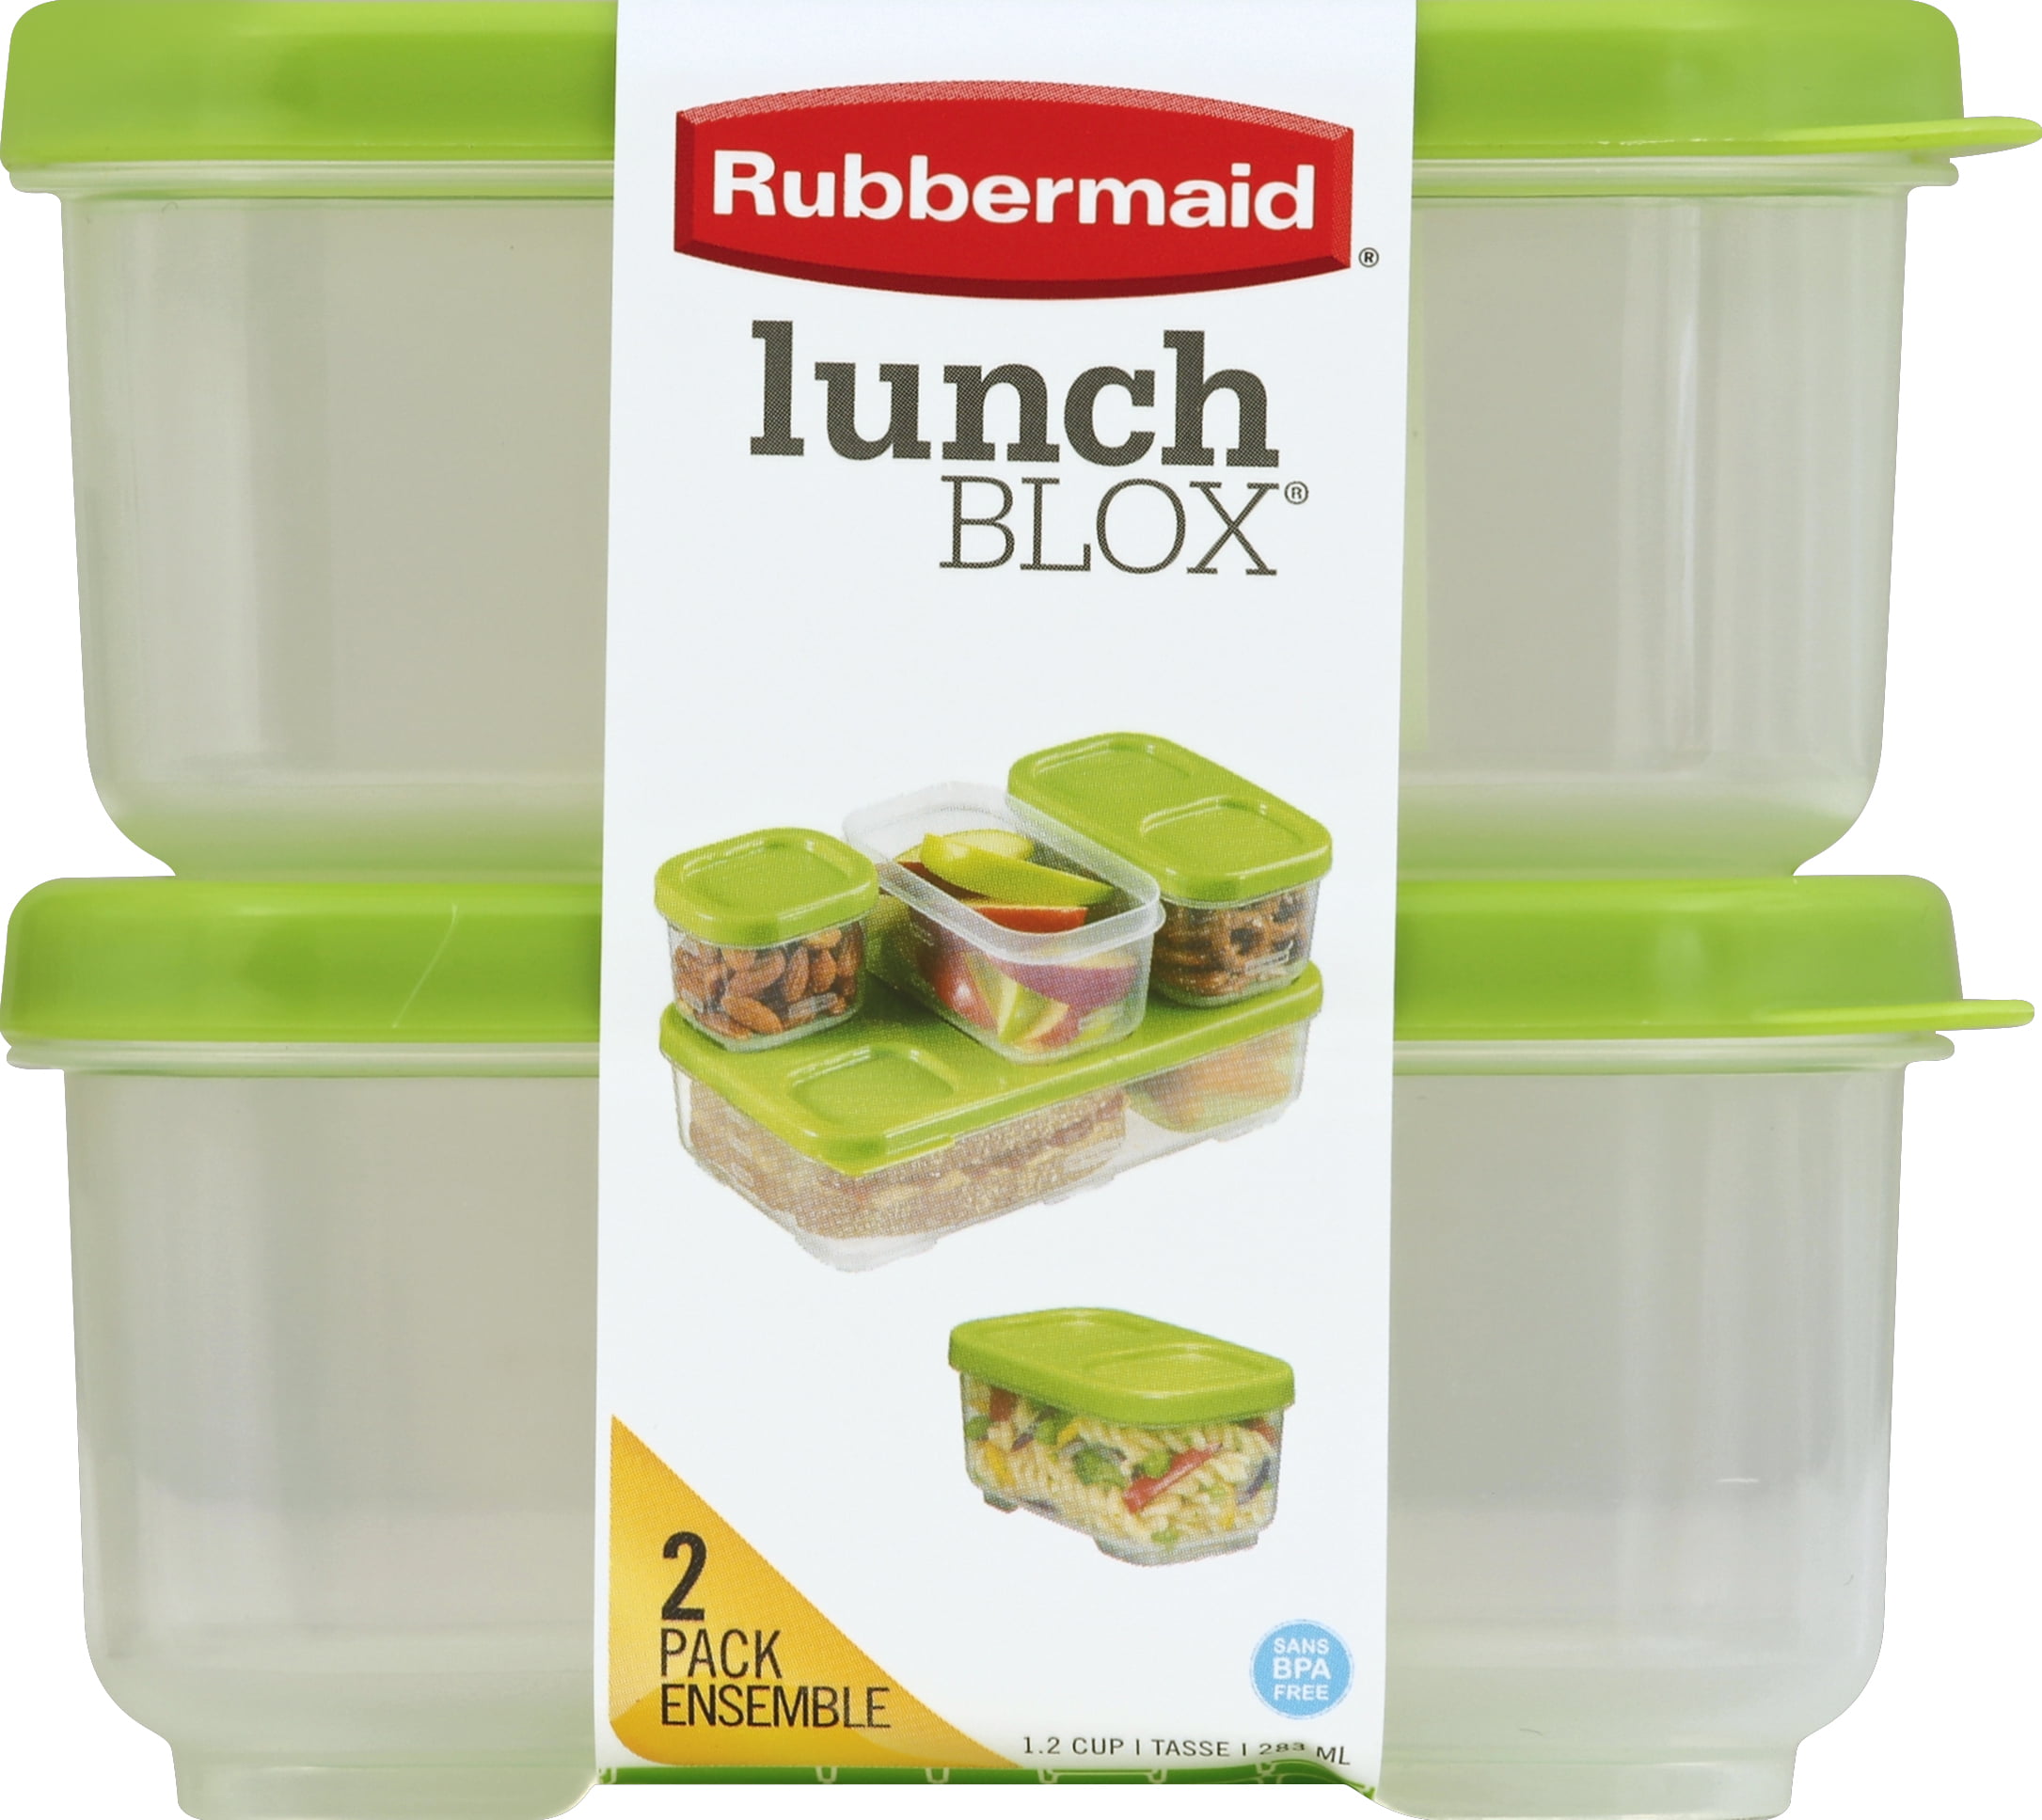 Rubbermaid LunchBlox 7-Piece Modular Entree Food Containers with